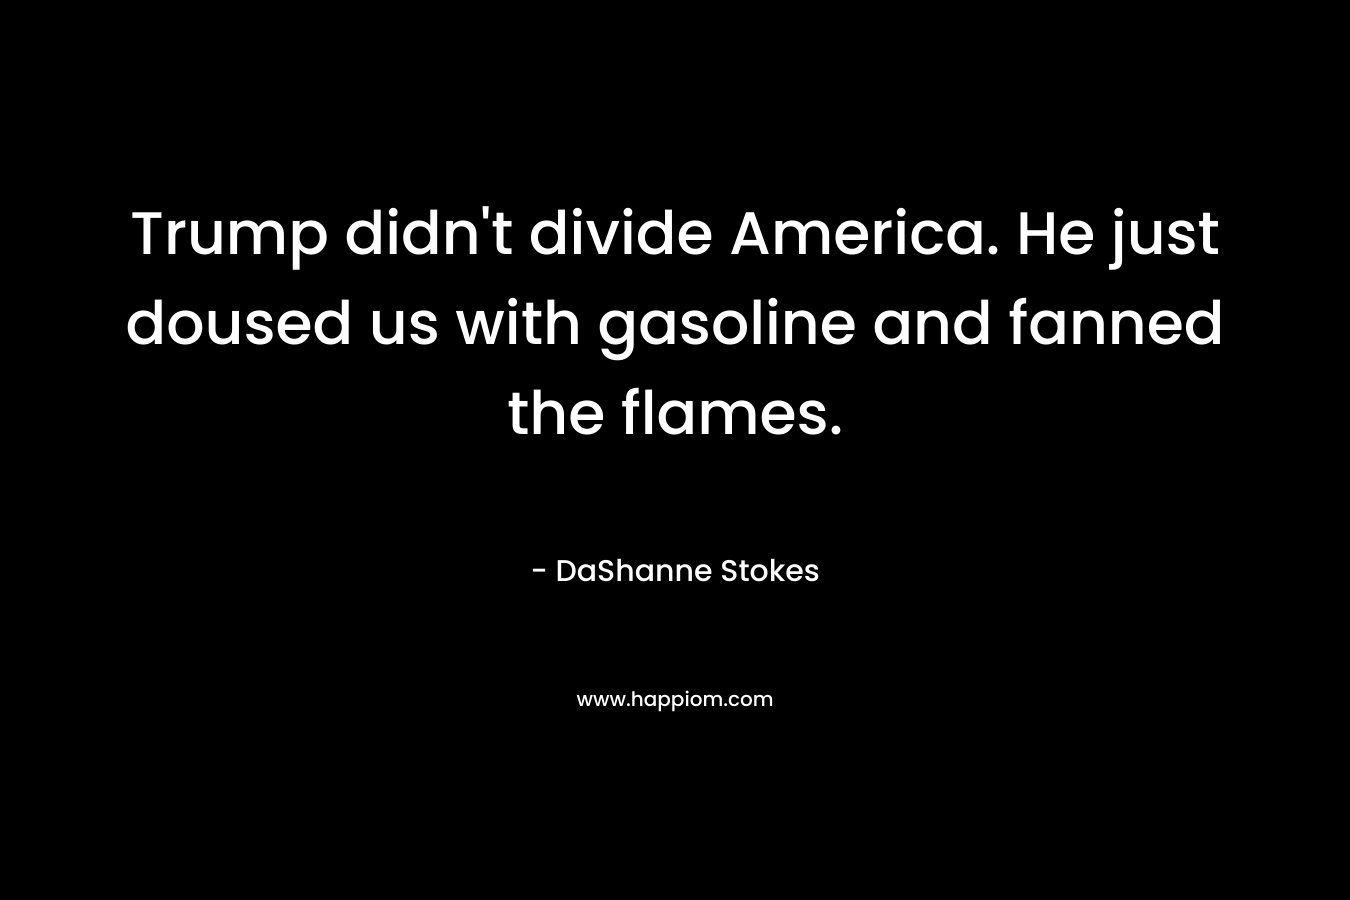 Trump didn’t divide America. He just doused us with gasoline and fanned the flames. – DaShanne Stokes